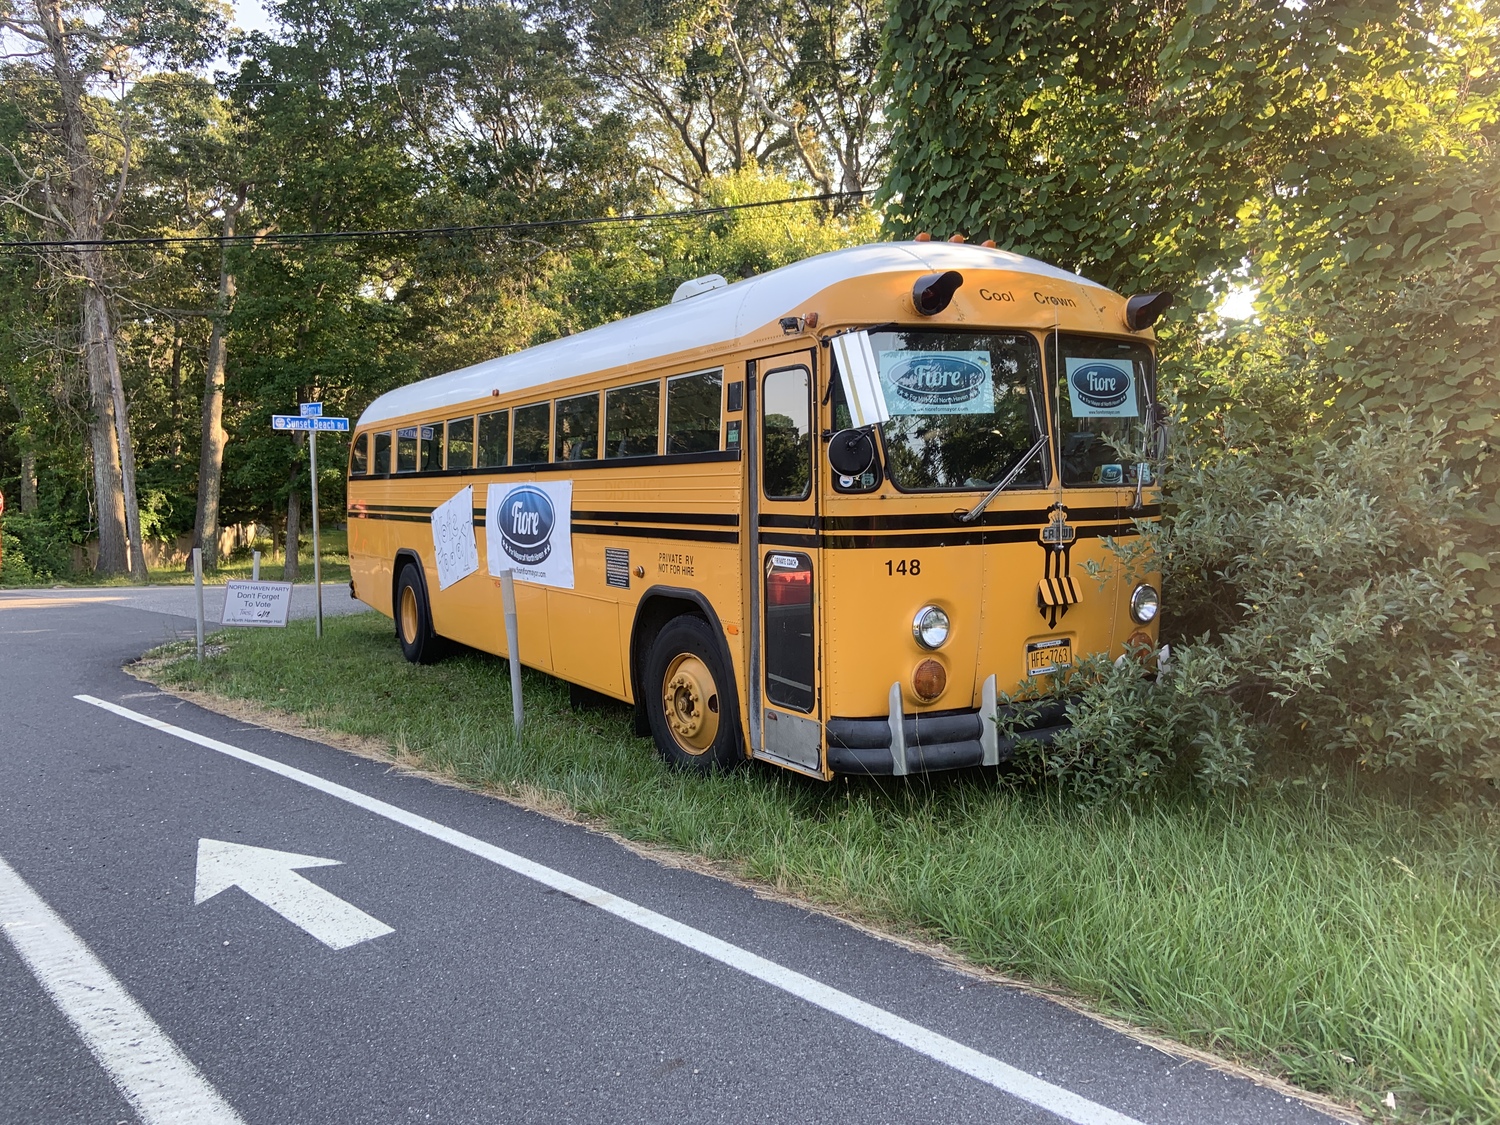 North Haven Mayor Chris Fiore, who has an eclectic car collection, parked his antique California school bus near his house on Tuesday, with signs urging residents to vote. STEPHEN J. KOTZ